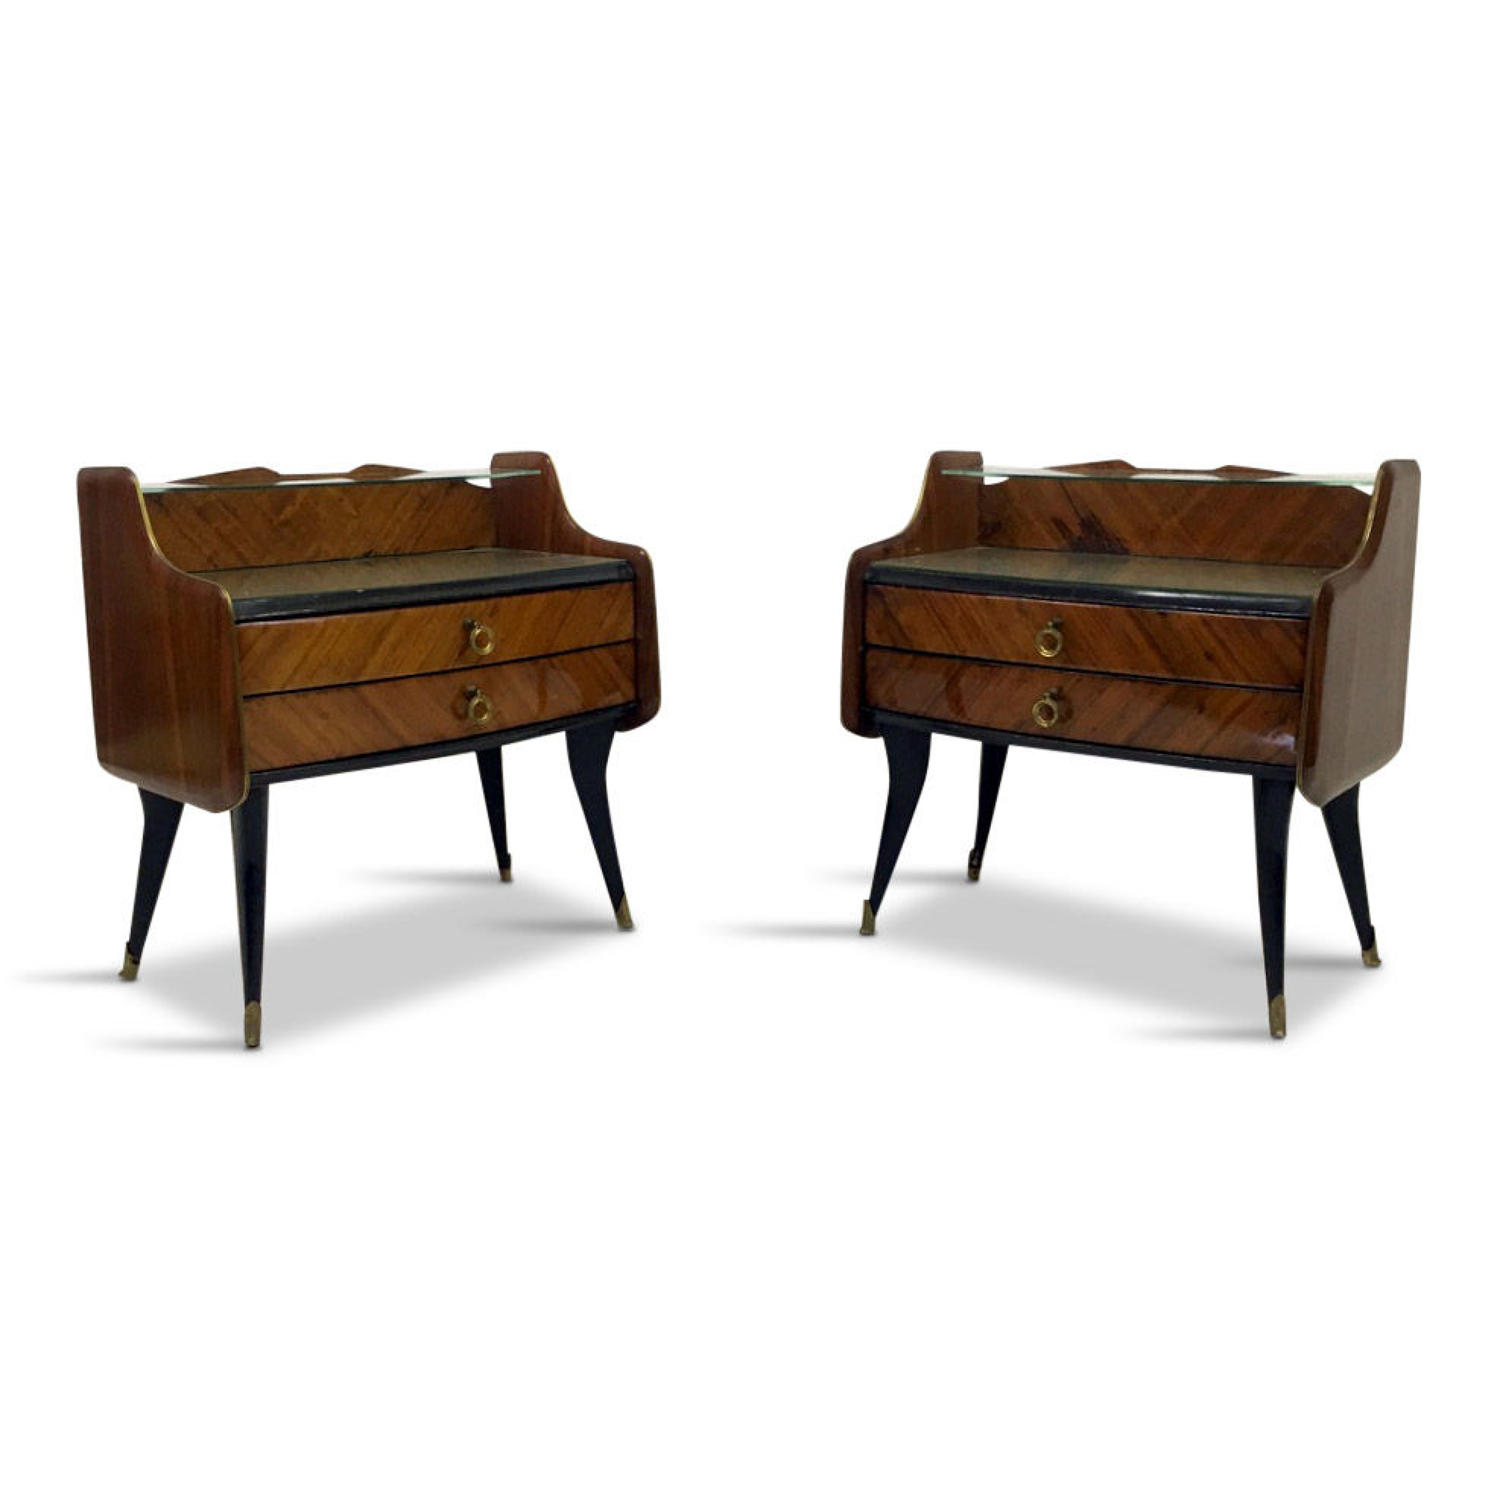 A pair of 1950s Italian rosewood bedside tables